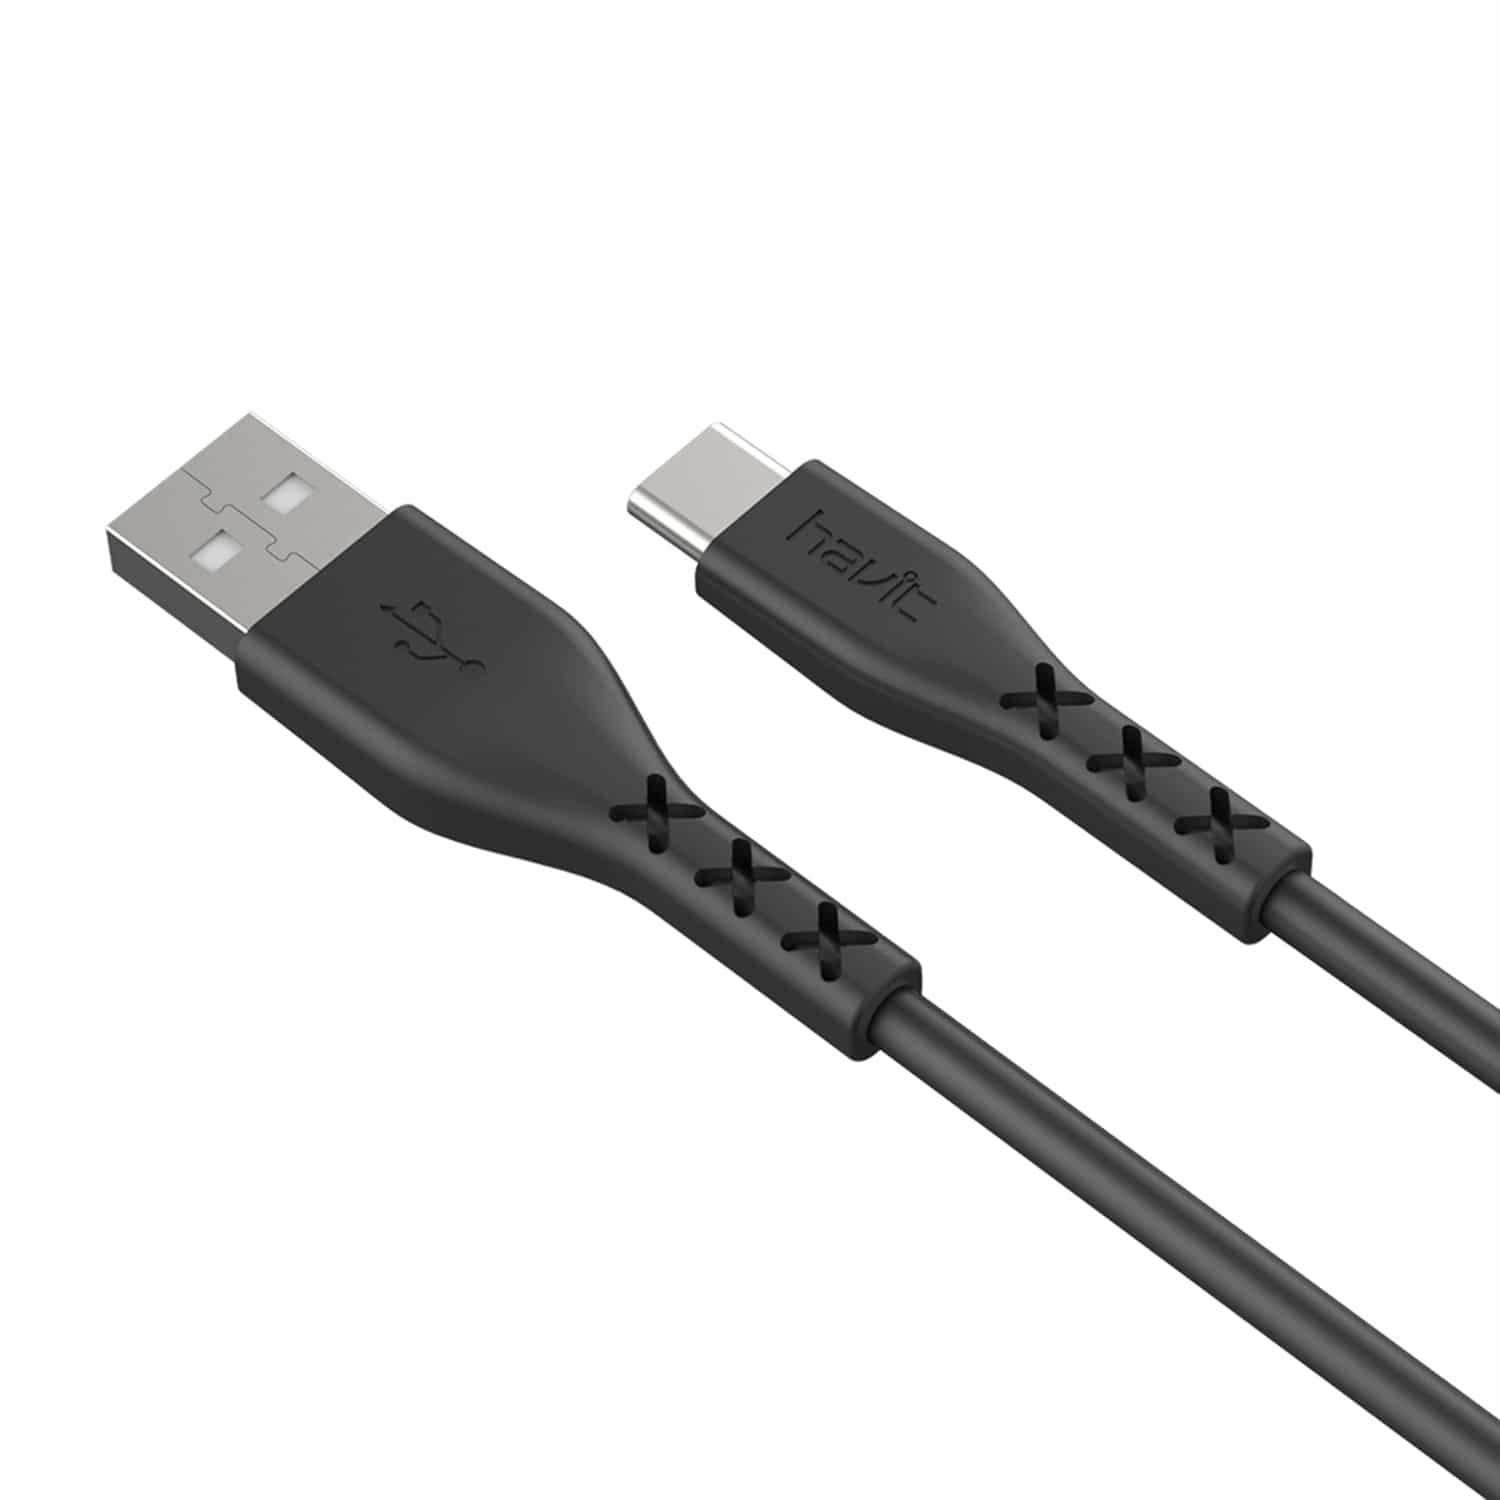 HAVIT HV-H68 USB To Type-C Cable, 2.0A Fast Charger, Black